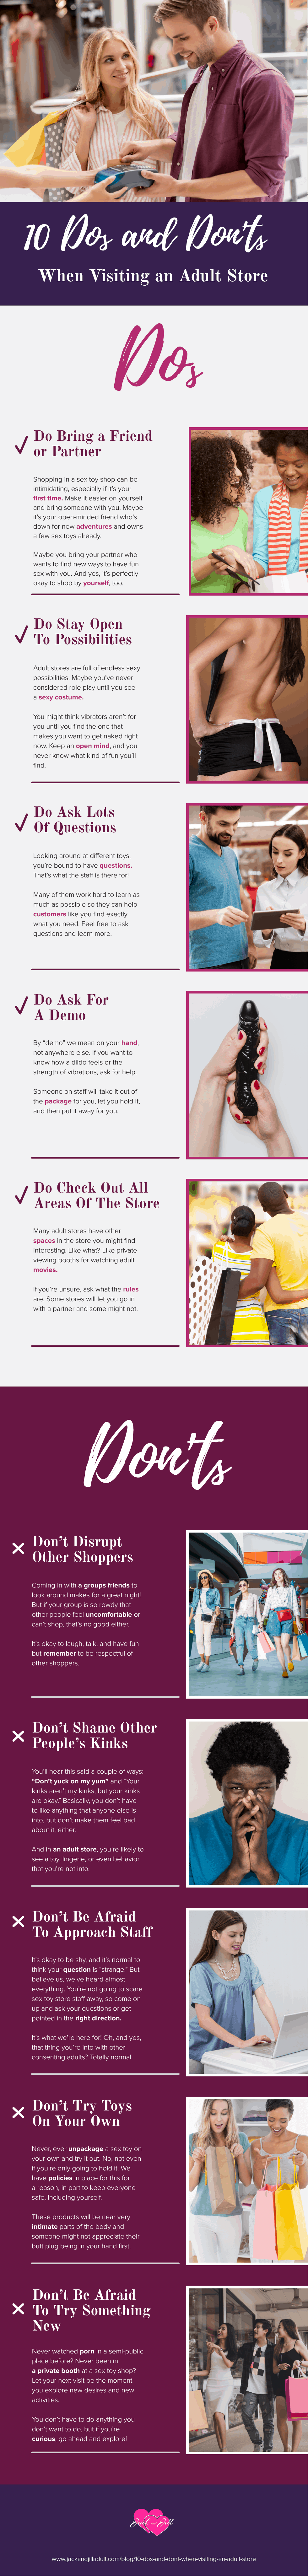 Infographic for 10 Dos and Don’t When Visiting an Adult Store